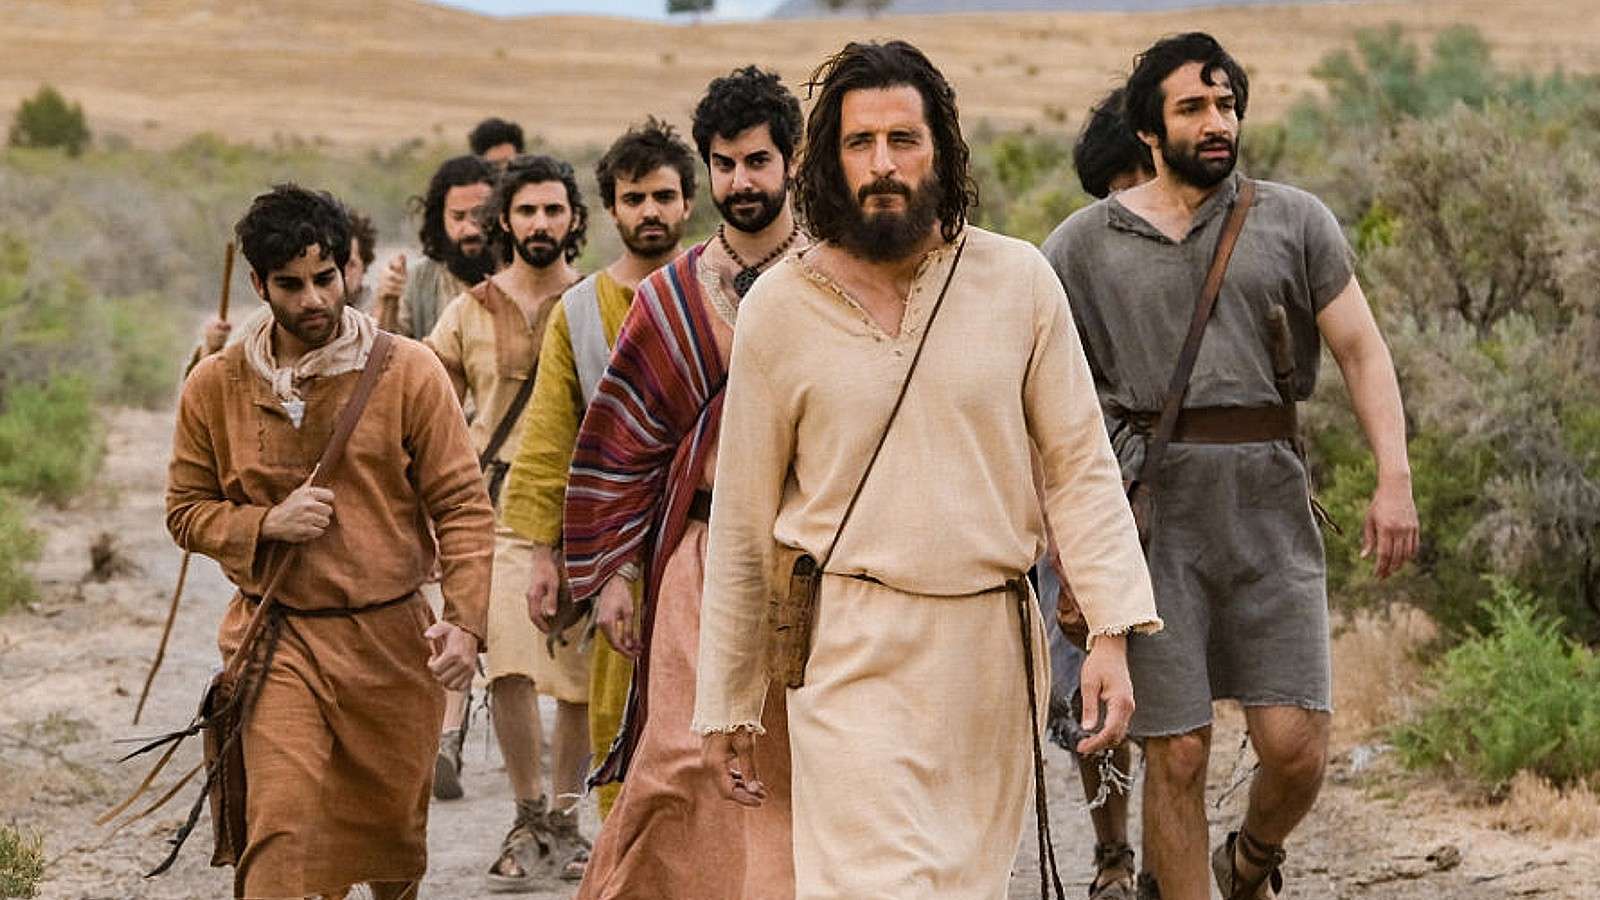 Jesus and the apostles in The Chosen cast